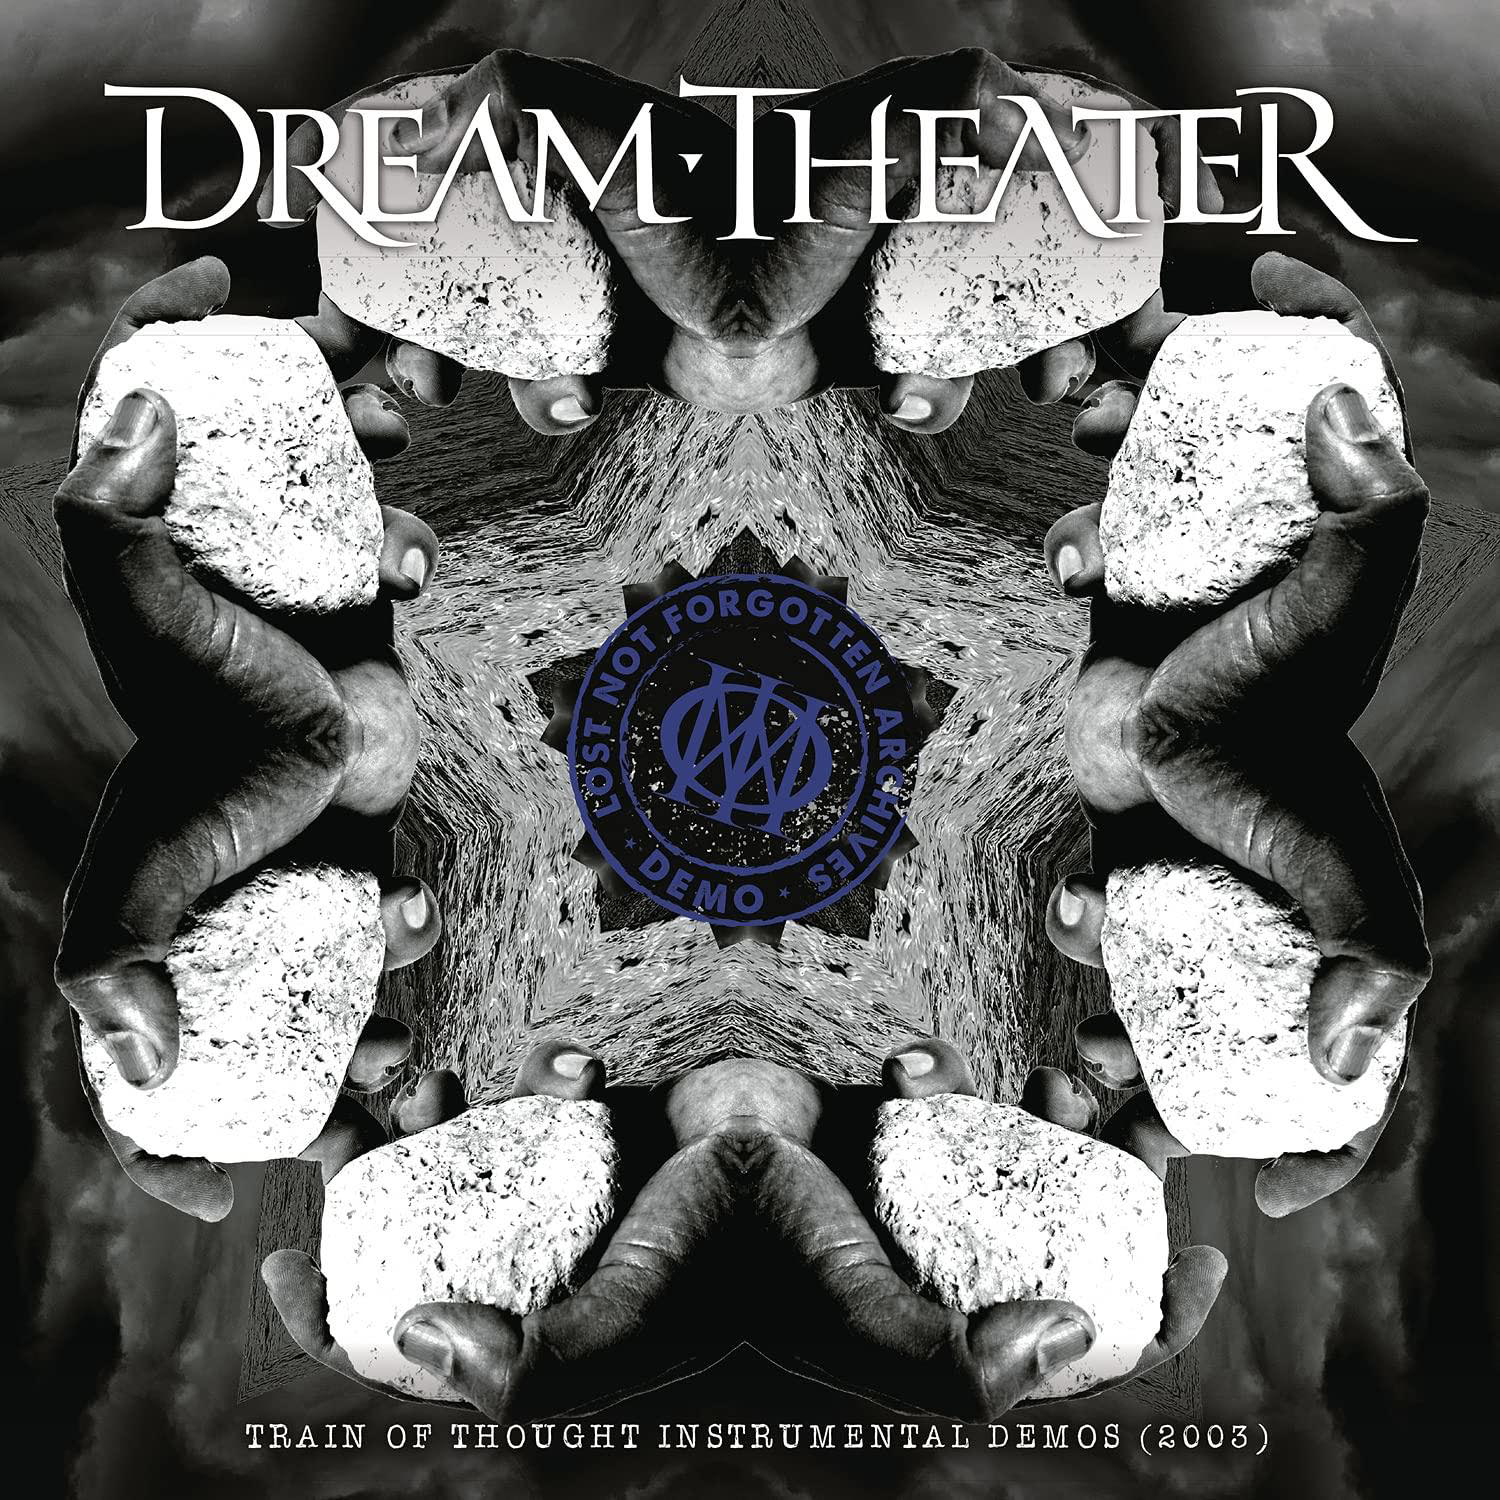 OF TRAIN Theater FORGOTTEN + - (LP Dream Bonus-CD) INST NOT LOST ARCHIVES: THOUGHT -